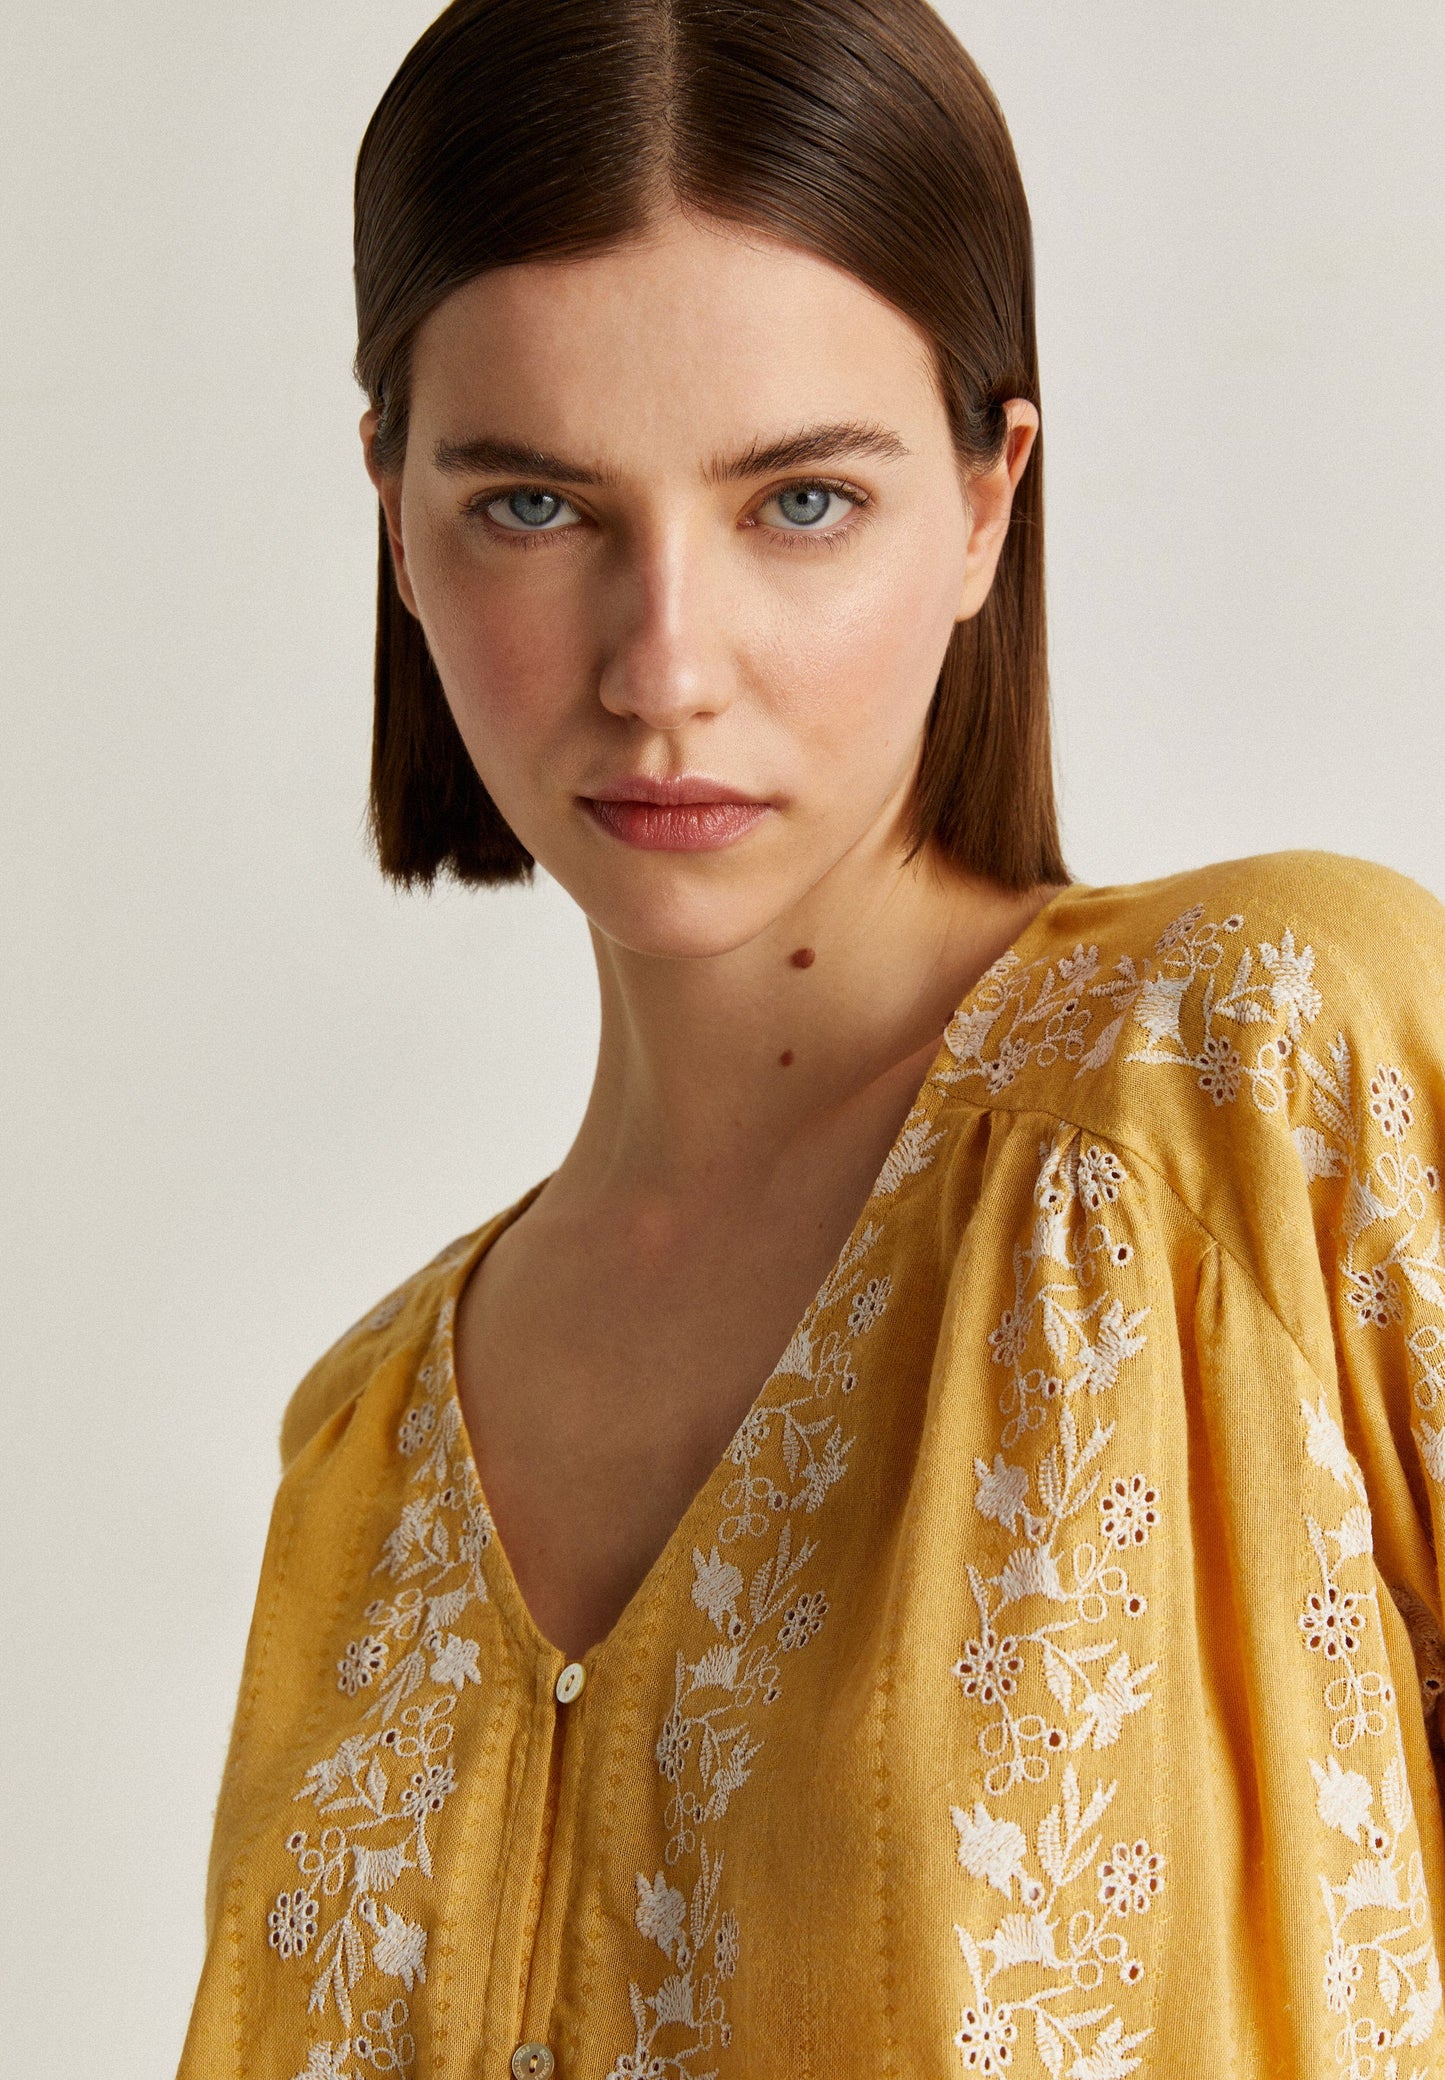 BLOUSE WITH CONTRAST EMBROIDERY